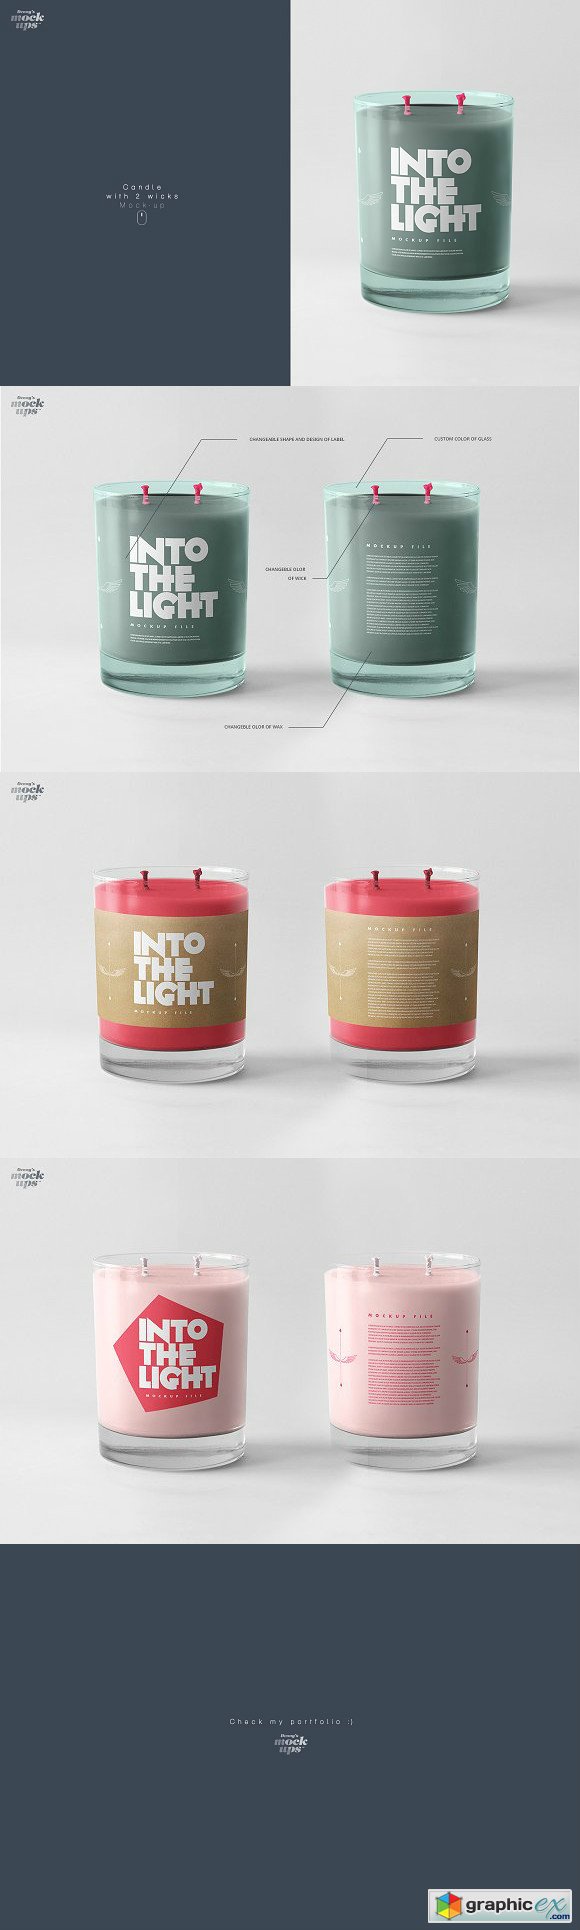 Candle with 2 wicks Mockup